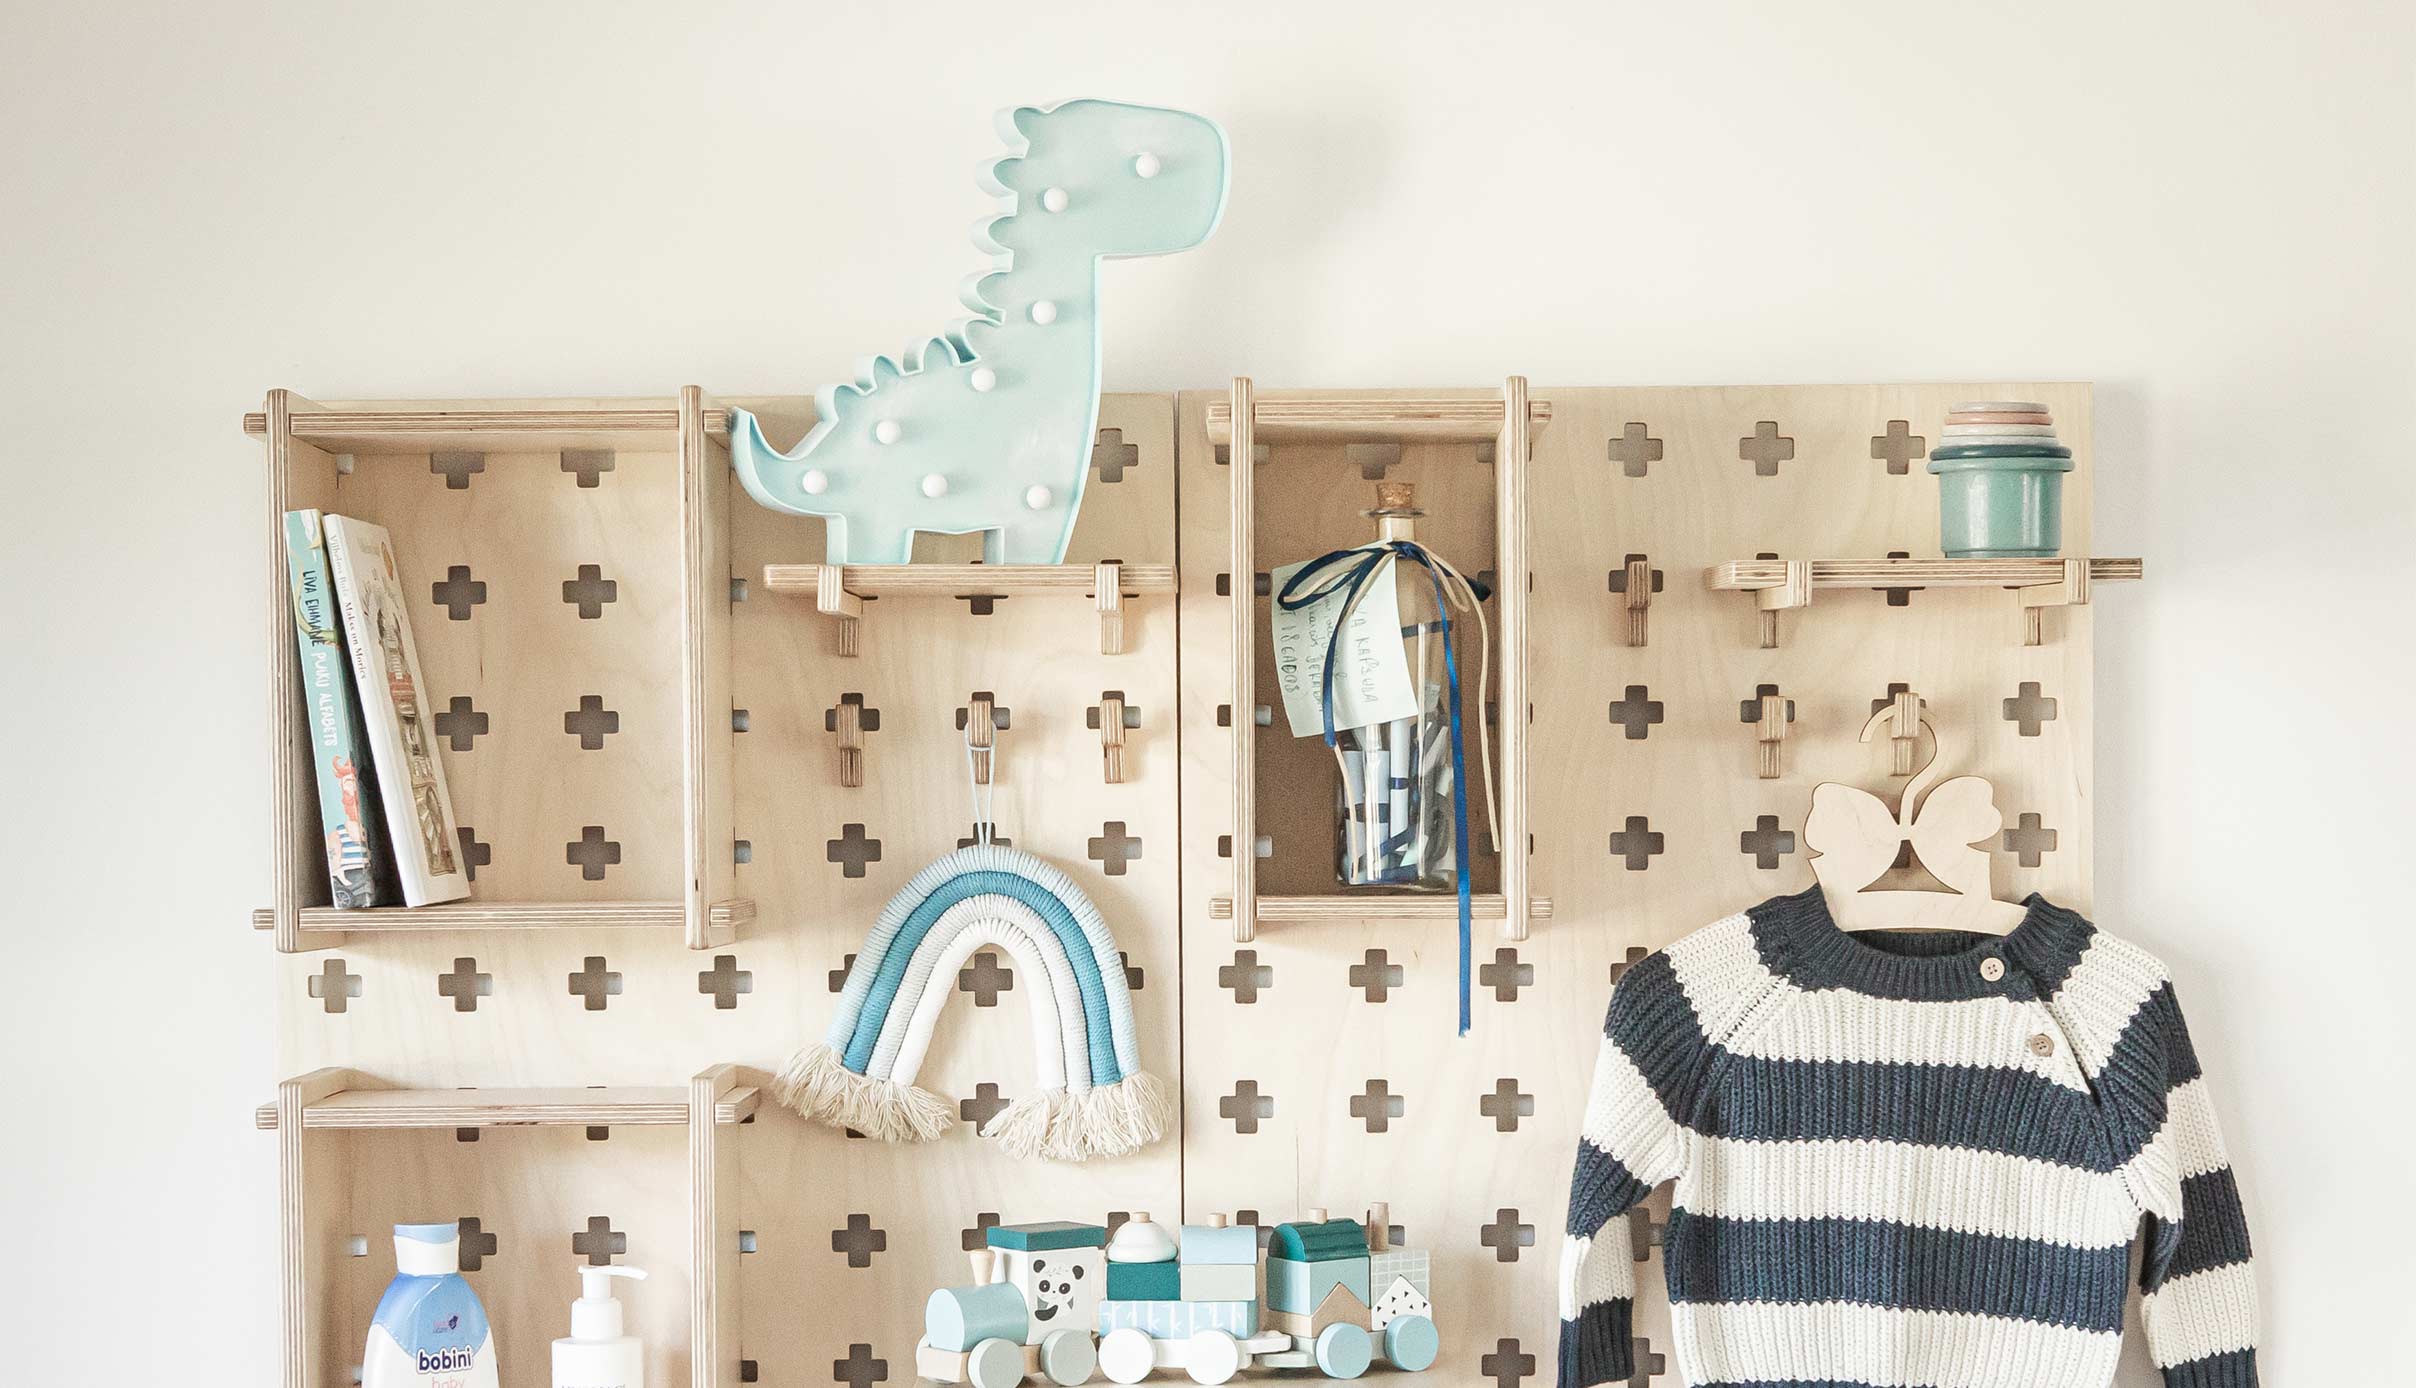 A child's room with clothes, toys, and a wooden shelf.